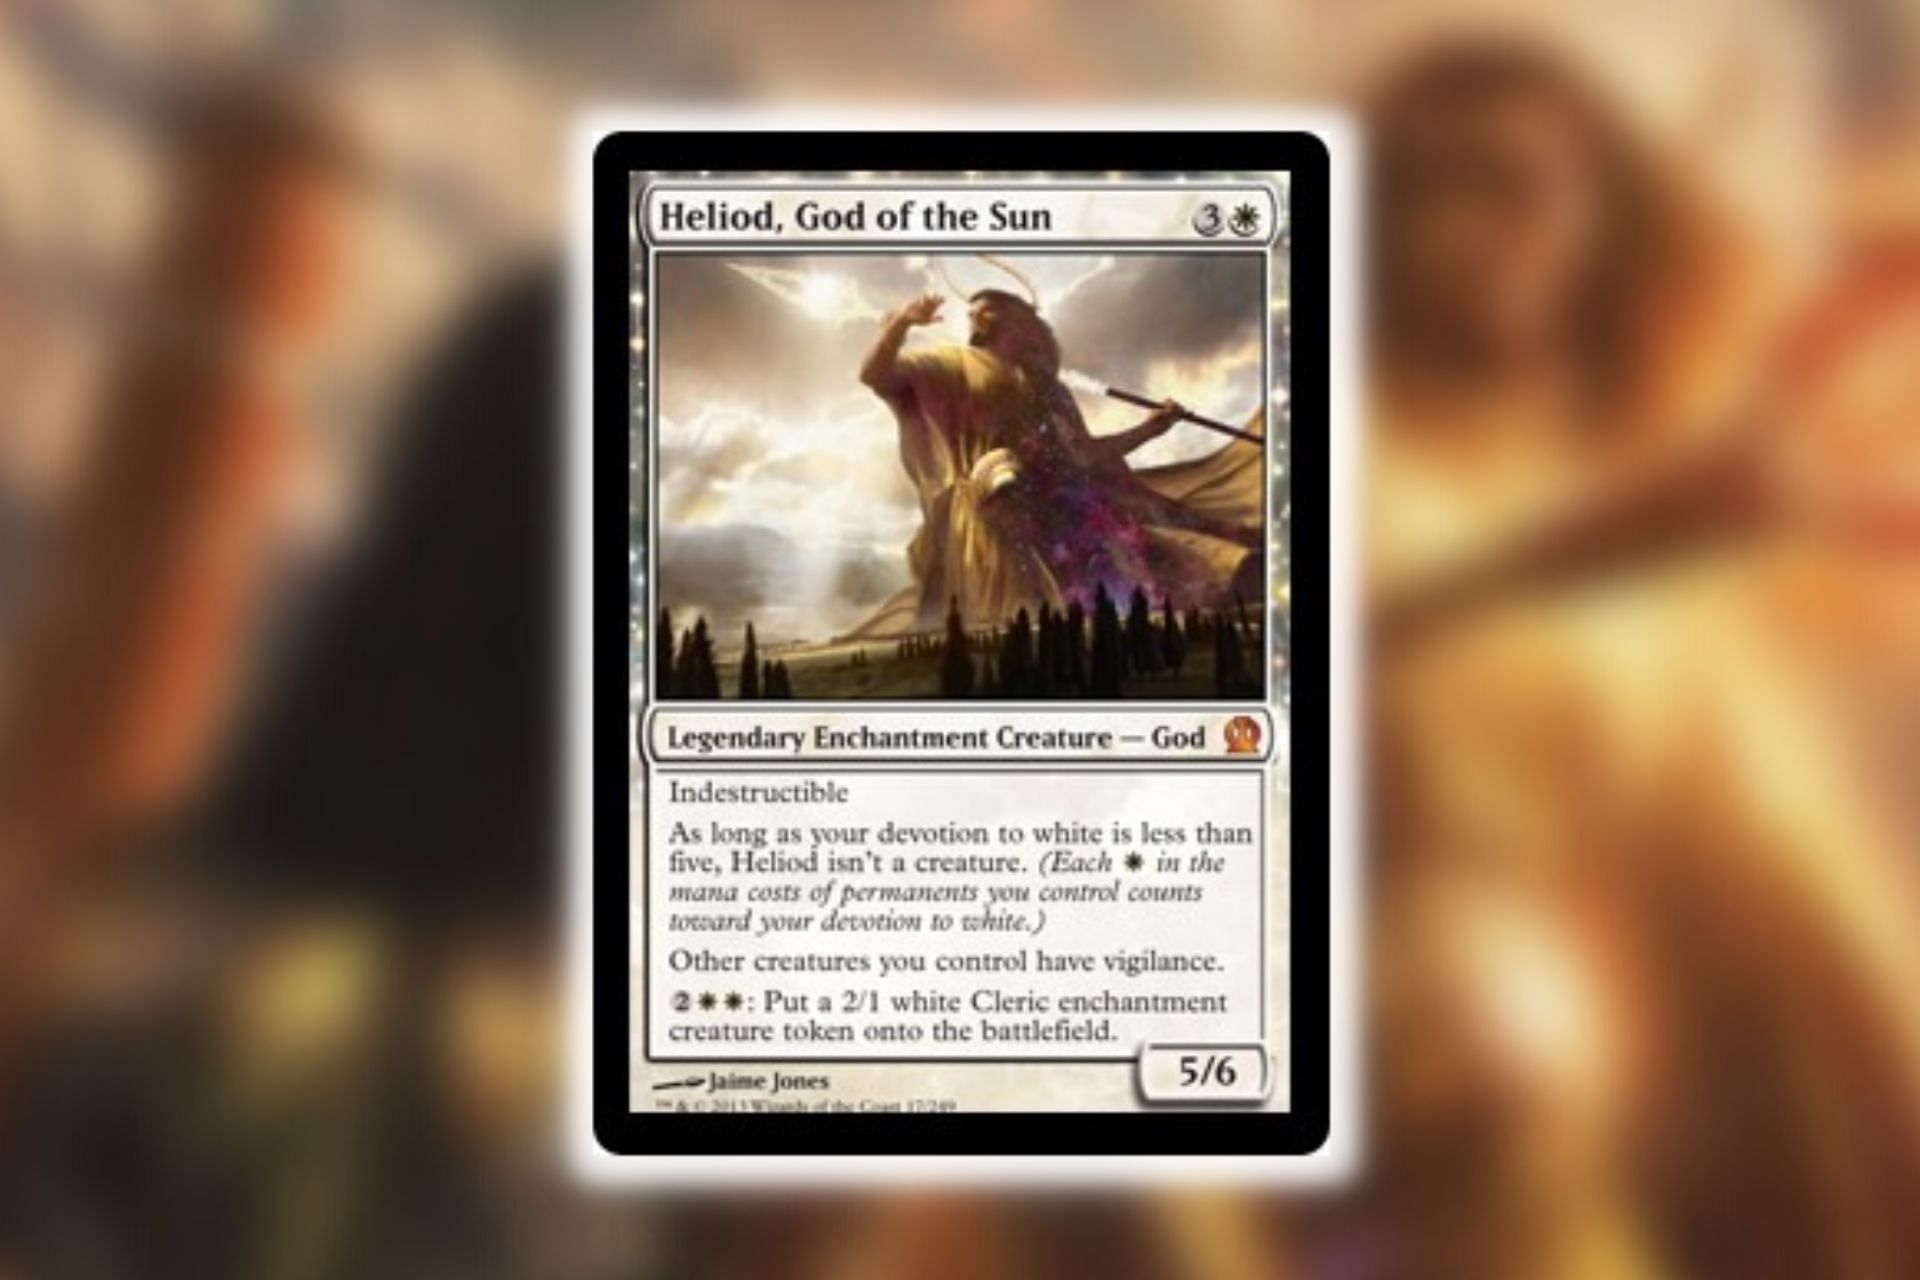 Heliod, God of the Sun in Magic: The Gathering (Image via Wizards of the Coast)